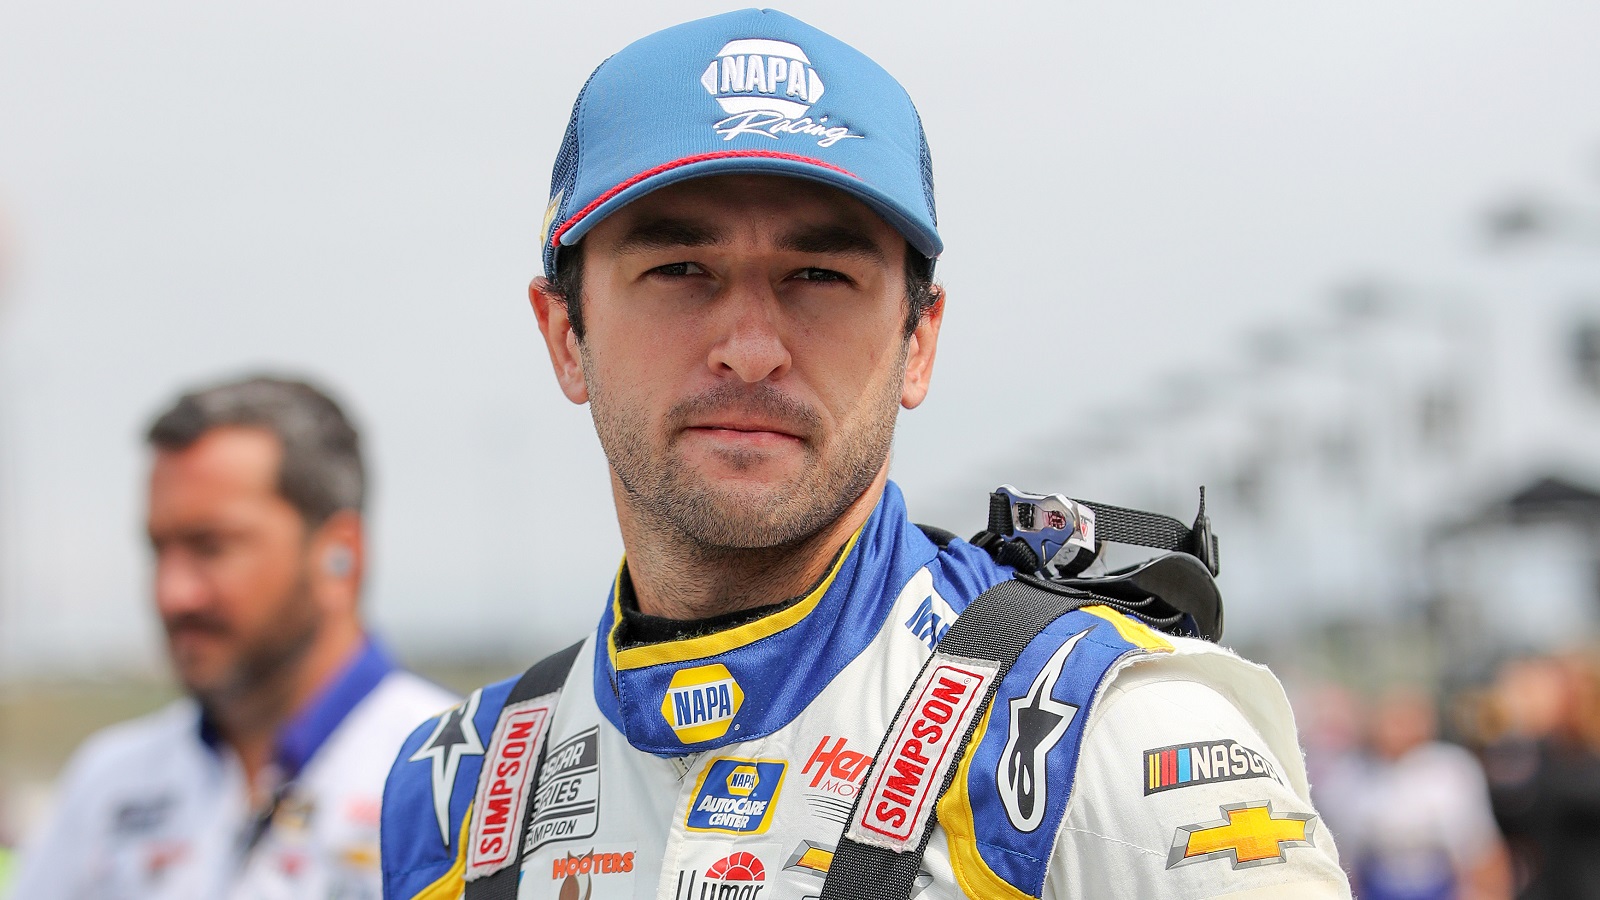 Chase Elliott looks on during qualifying for the NASCAR Cup Series Hollywood Casino 400 at Kansas Speedway on Sept. 10, 2022. | Meg Oliphant/Getty Images